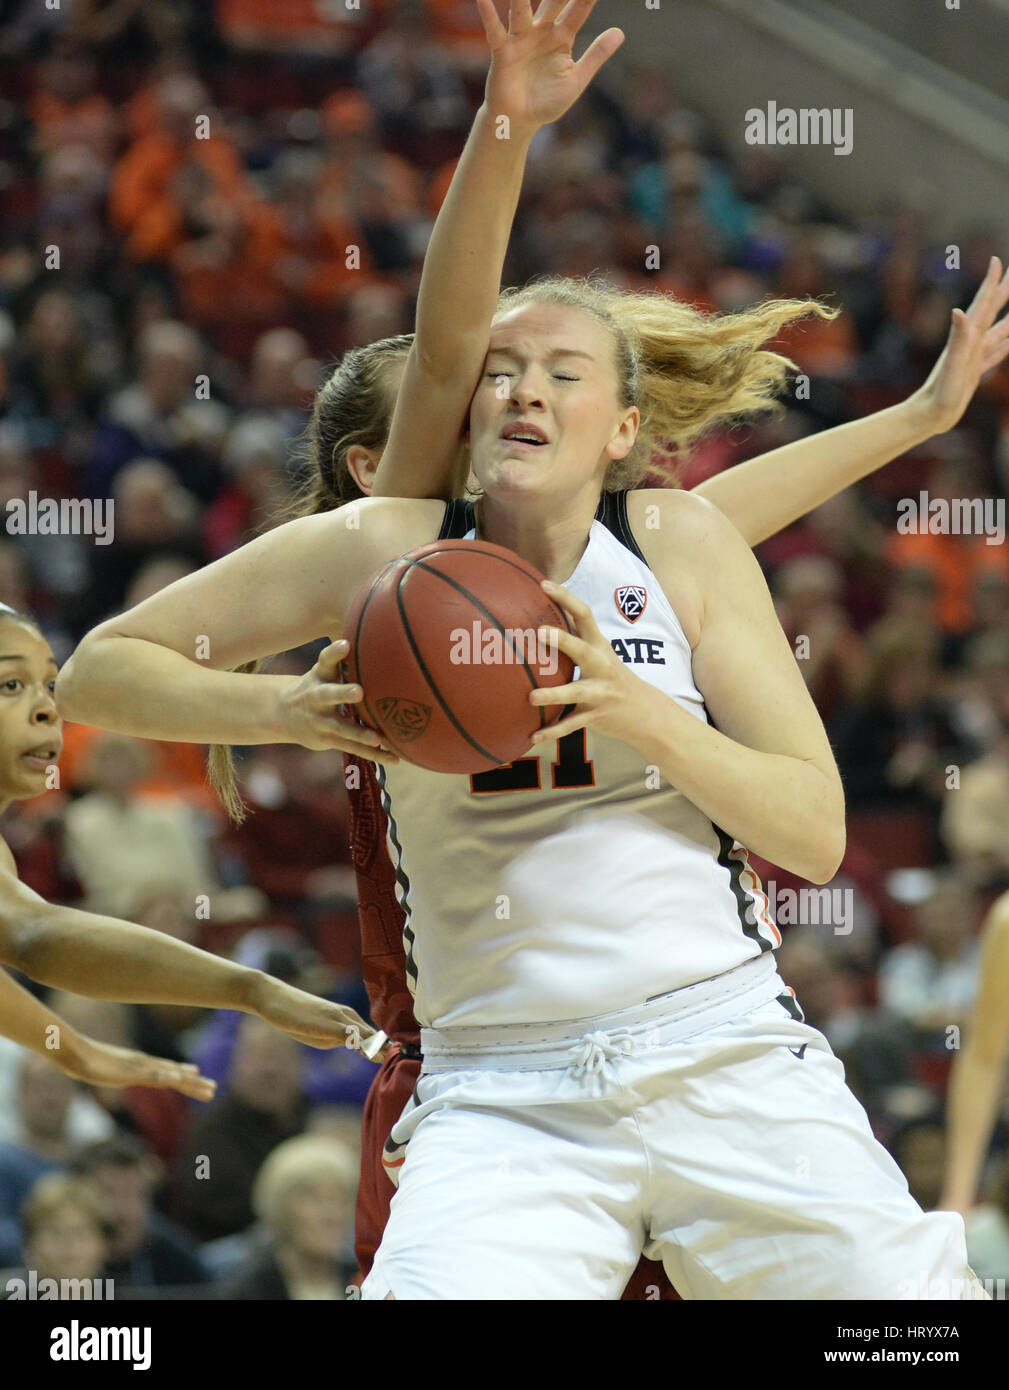 Seattle, WA, USA. 5th Mar, 2017. OSU center Marie Gulich (21) goes to the hoop against Stanford's Alanna Smith (11) during the PAC12 women's tournament final between the Oregon State Beavers and the Stanford Cardinal. The game was played at Key Arena in Seattle, WA. Jeff Halstead/CSM/Alamy Live News Stock Photo